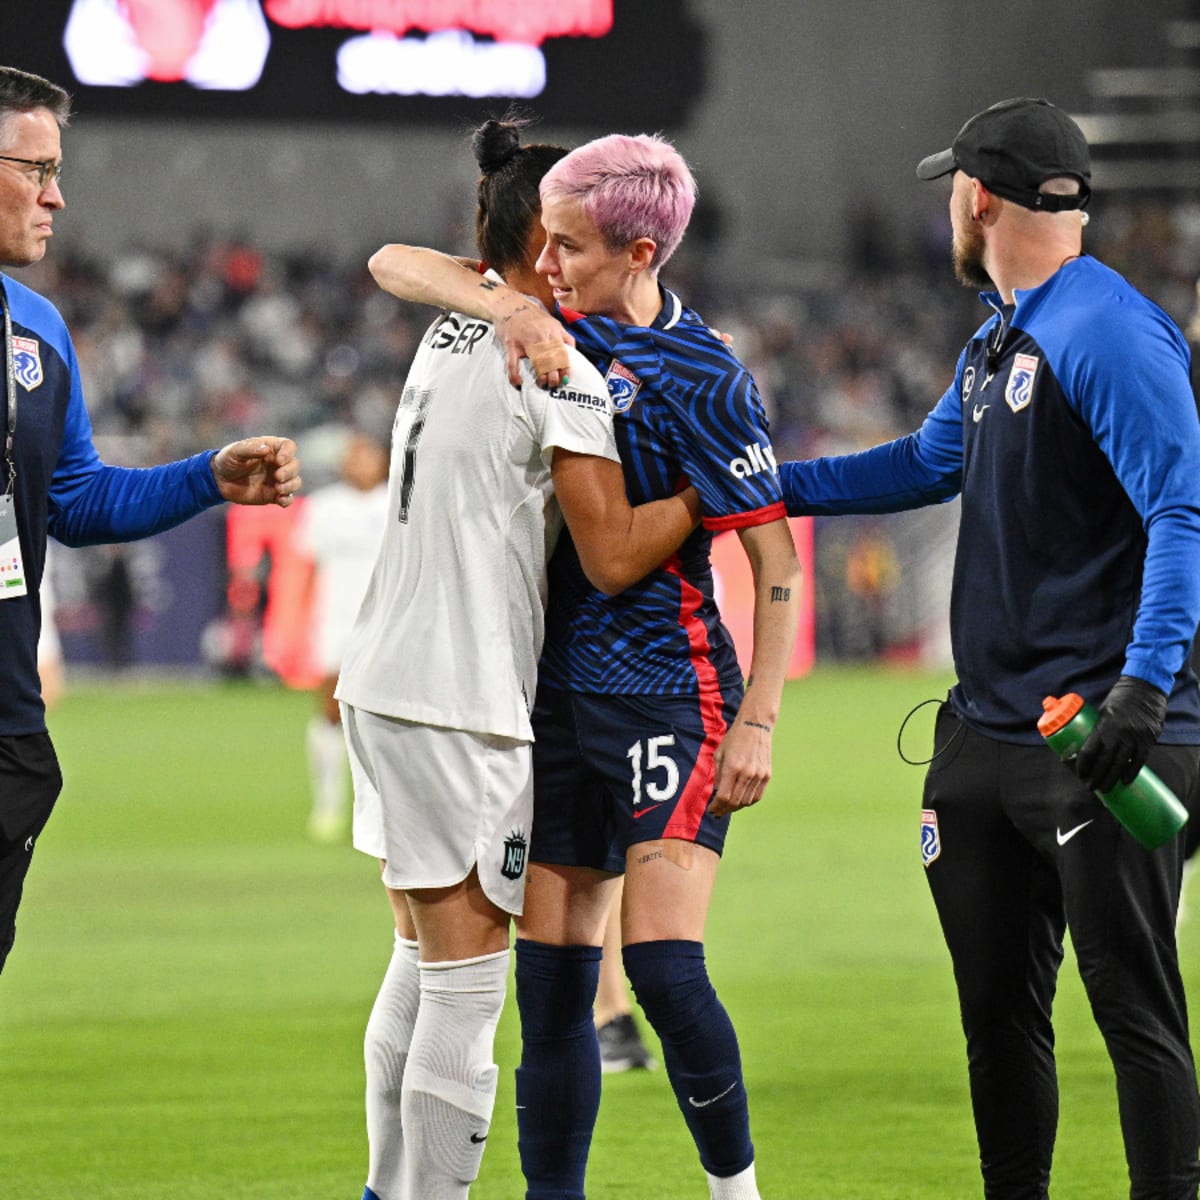 NWSL Championship: Rapinoe, Krieger play their final game Saturday